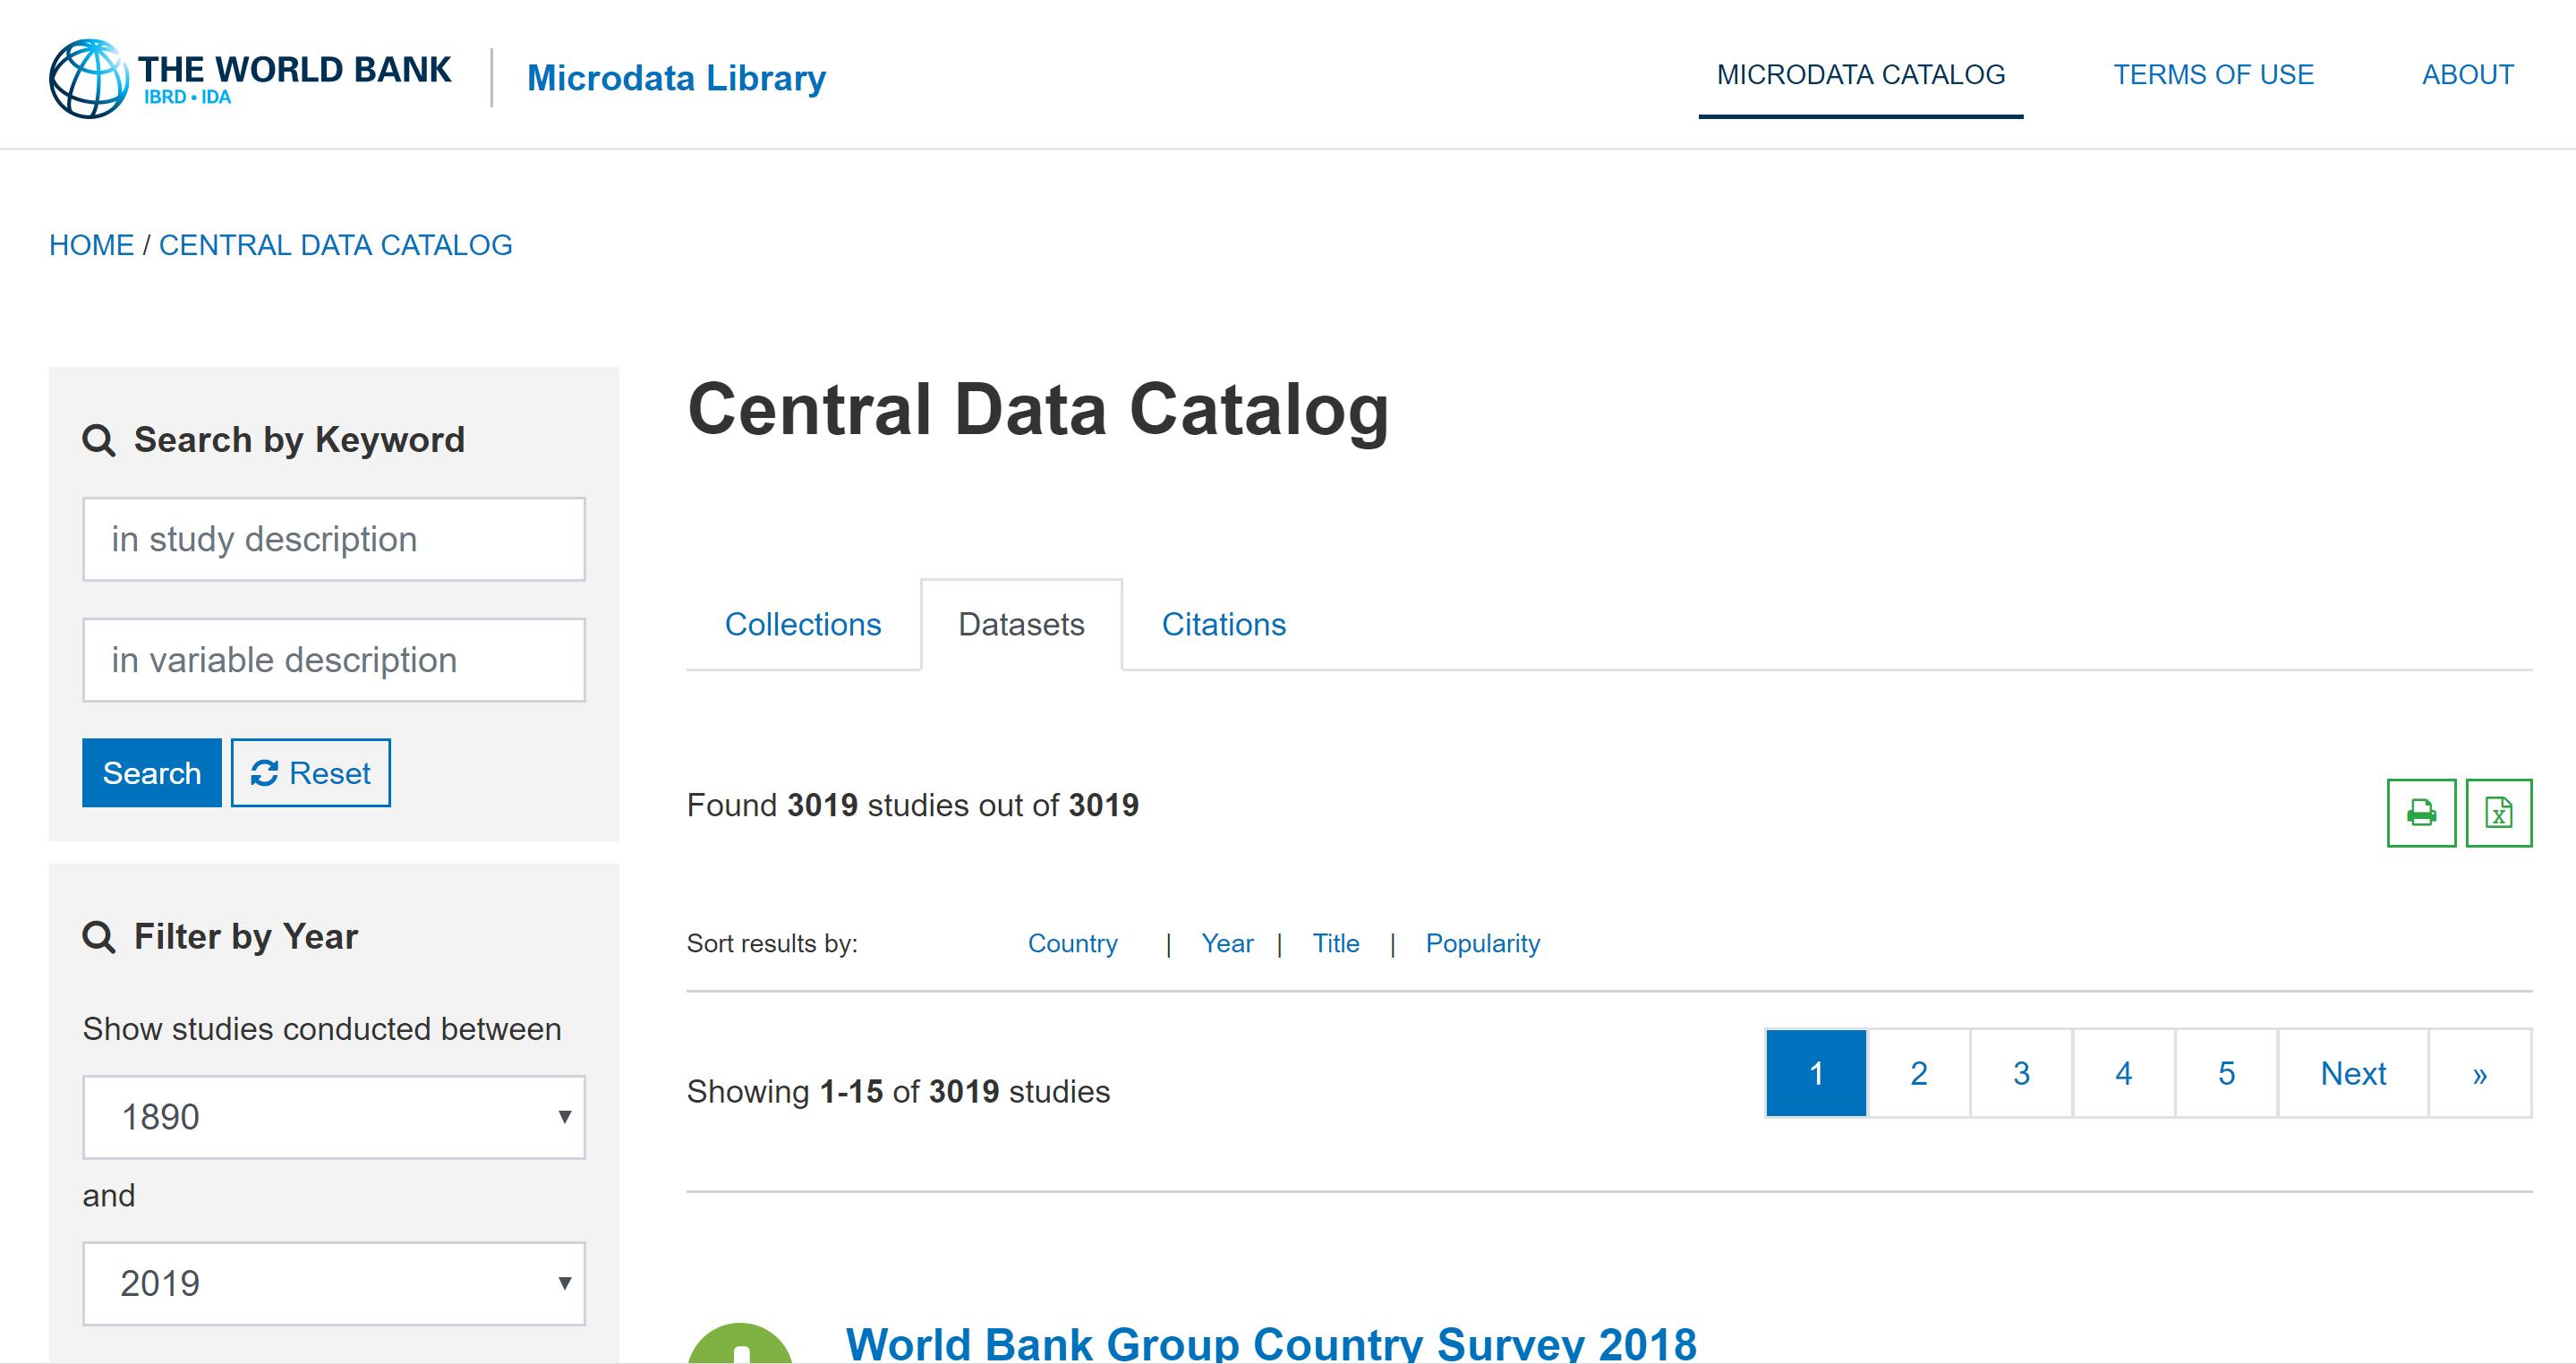 Screenshot of the Central Data Catalog page. On the left, there are two Search by Keyword options which allow you to search by study description or by variable description, respectively. Below them, there is also a Filter by Year option. The seventh searching result on the right shows the Comprehensive Baseline Study on Digital Remittances 2016.